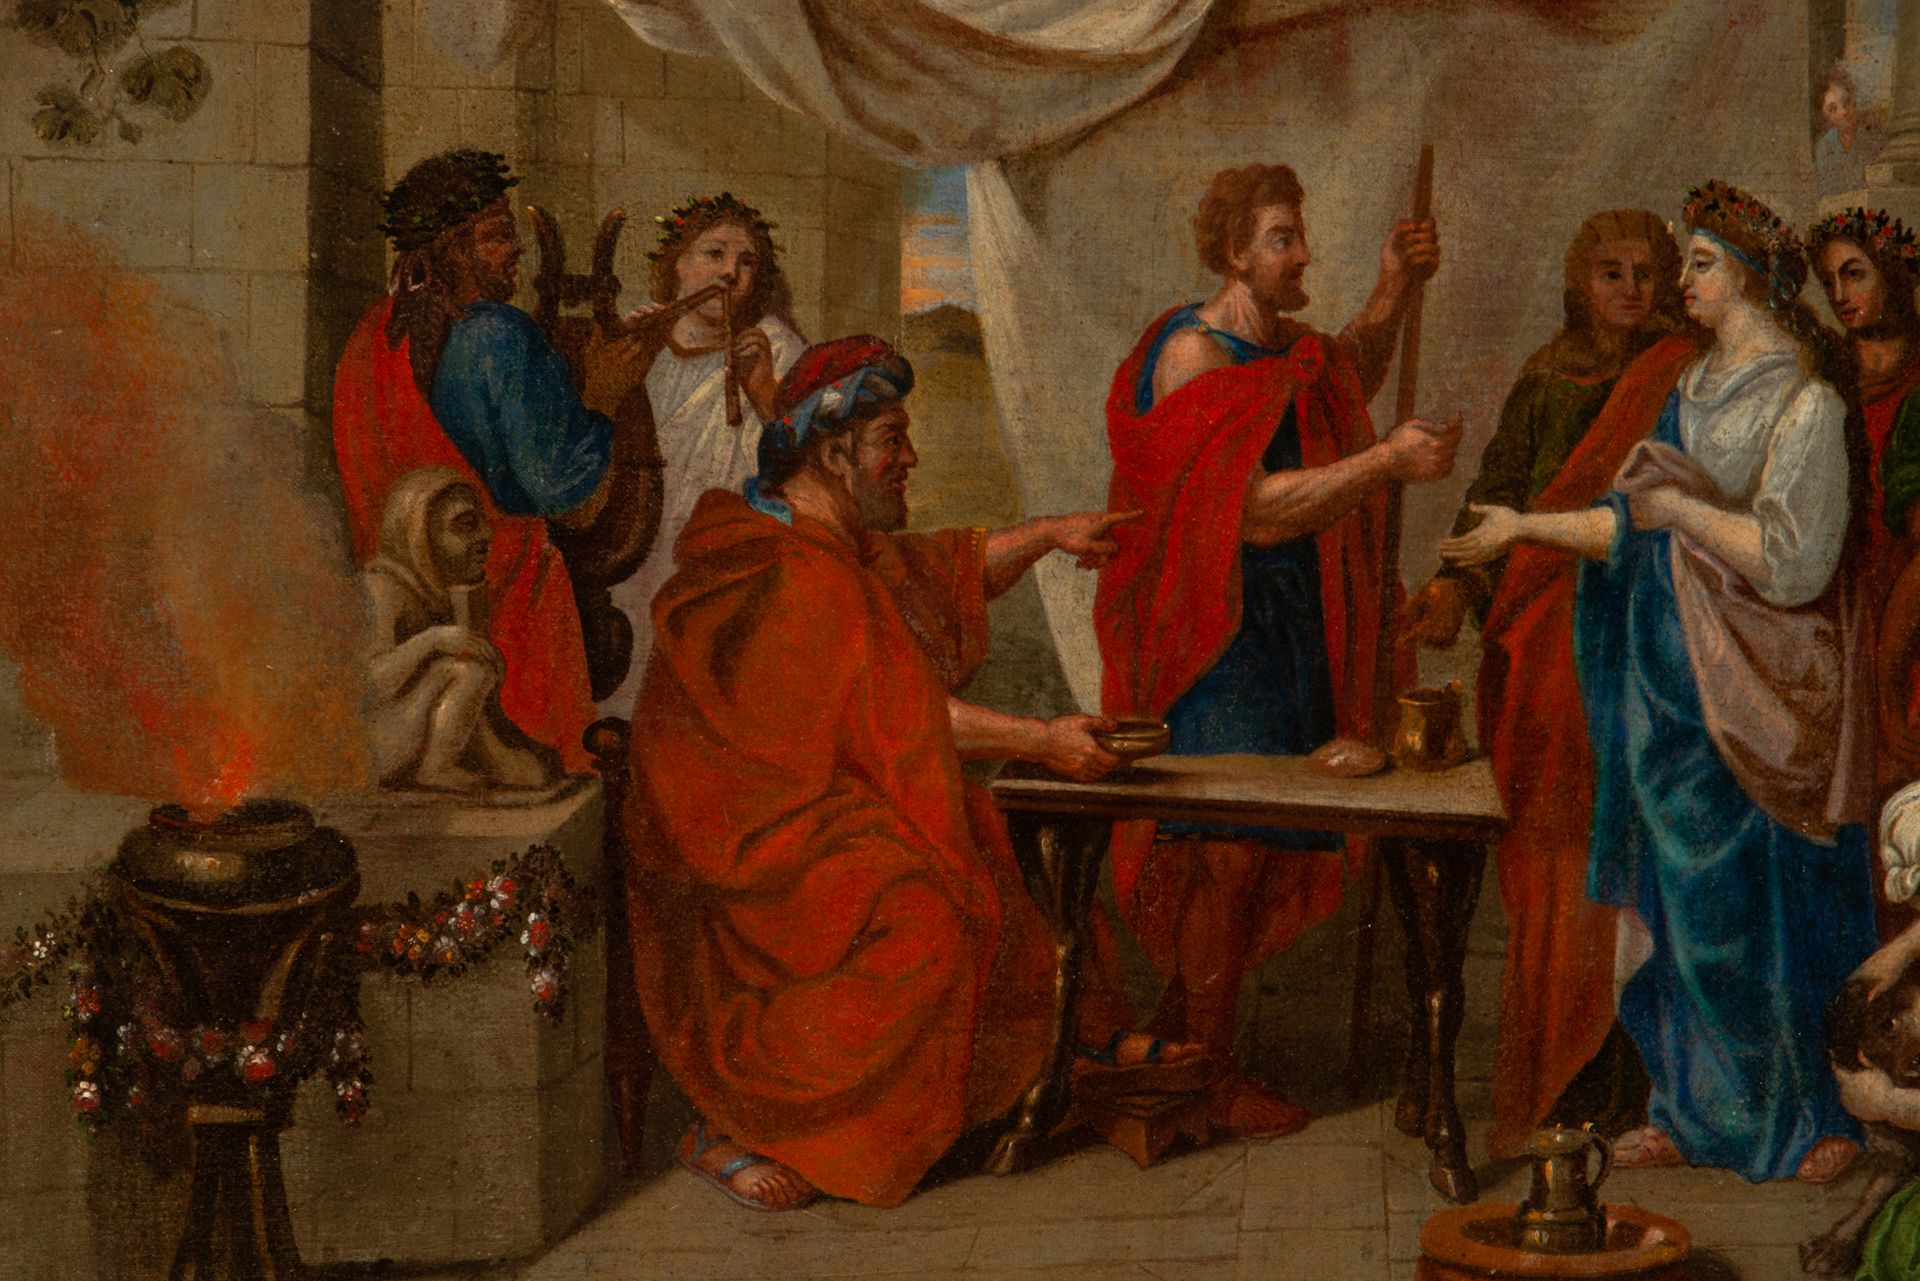 Salome in front of King Herod, 18th century Italian school - Image 3 of 5